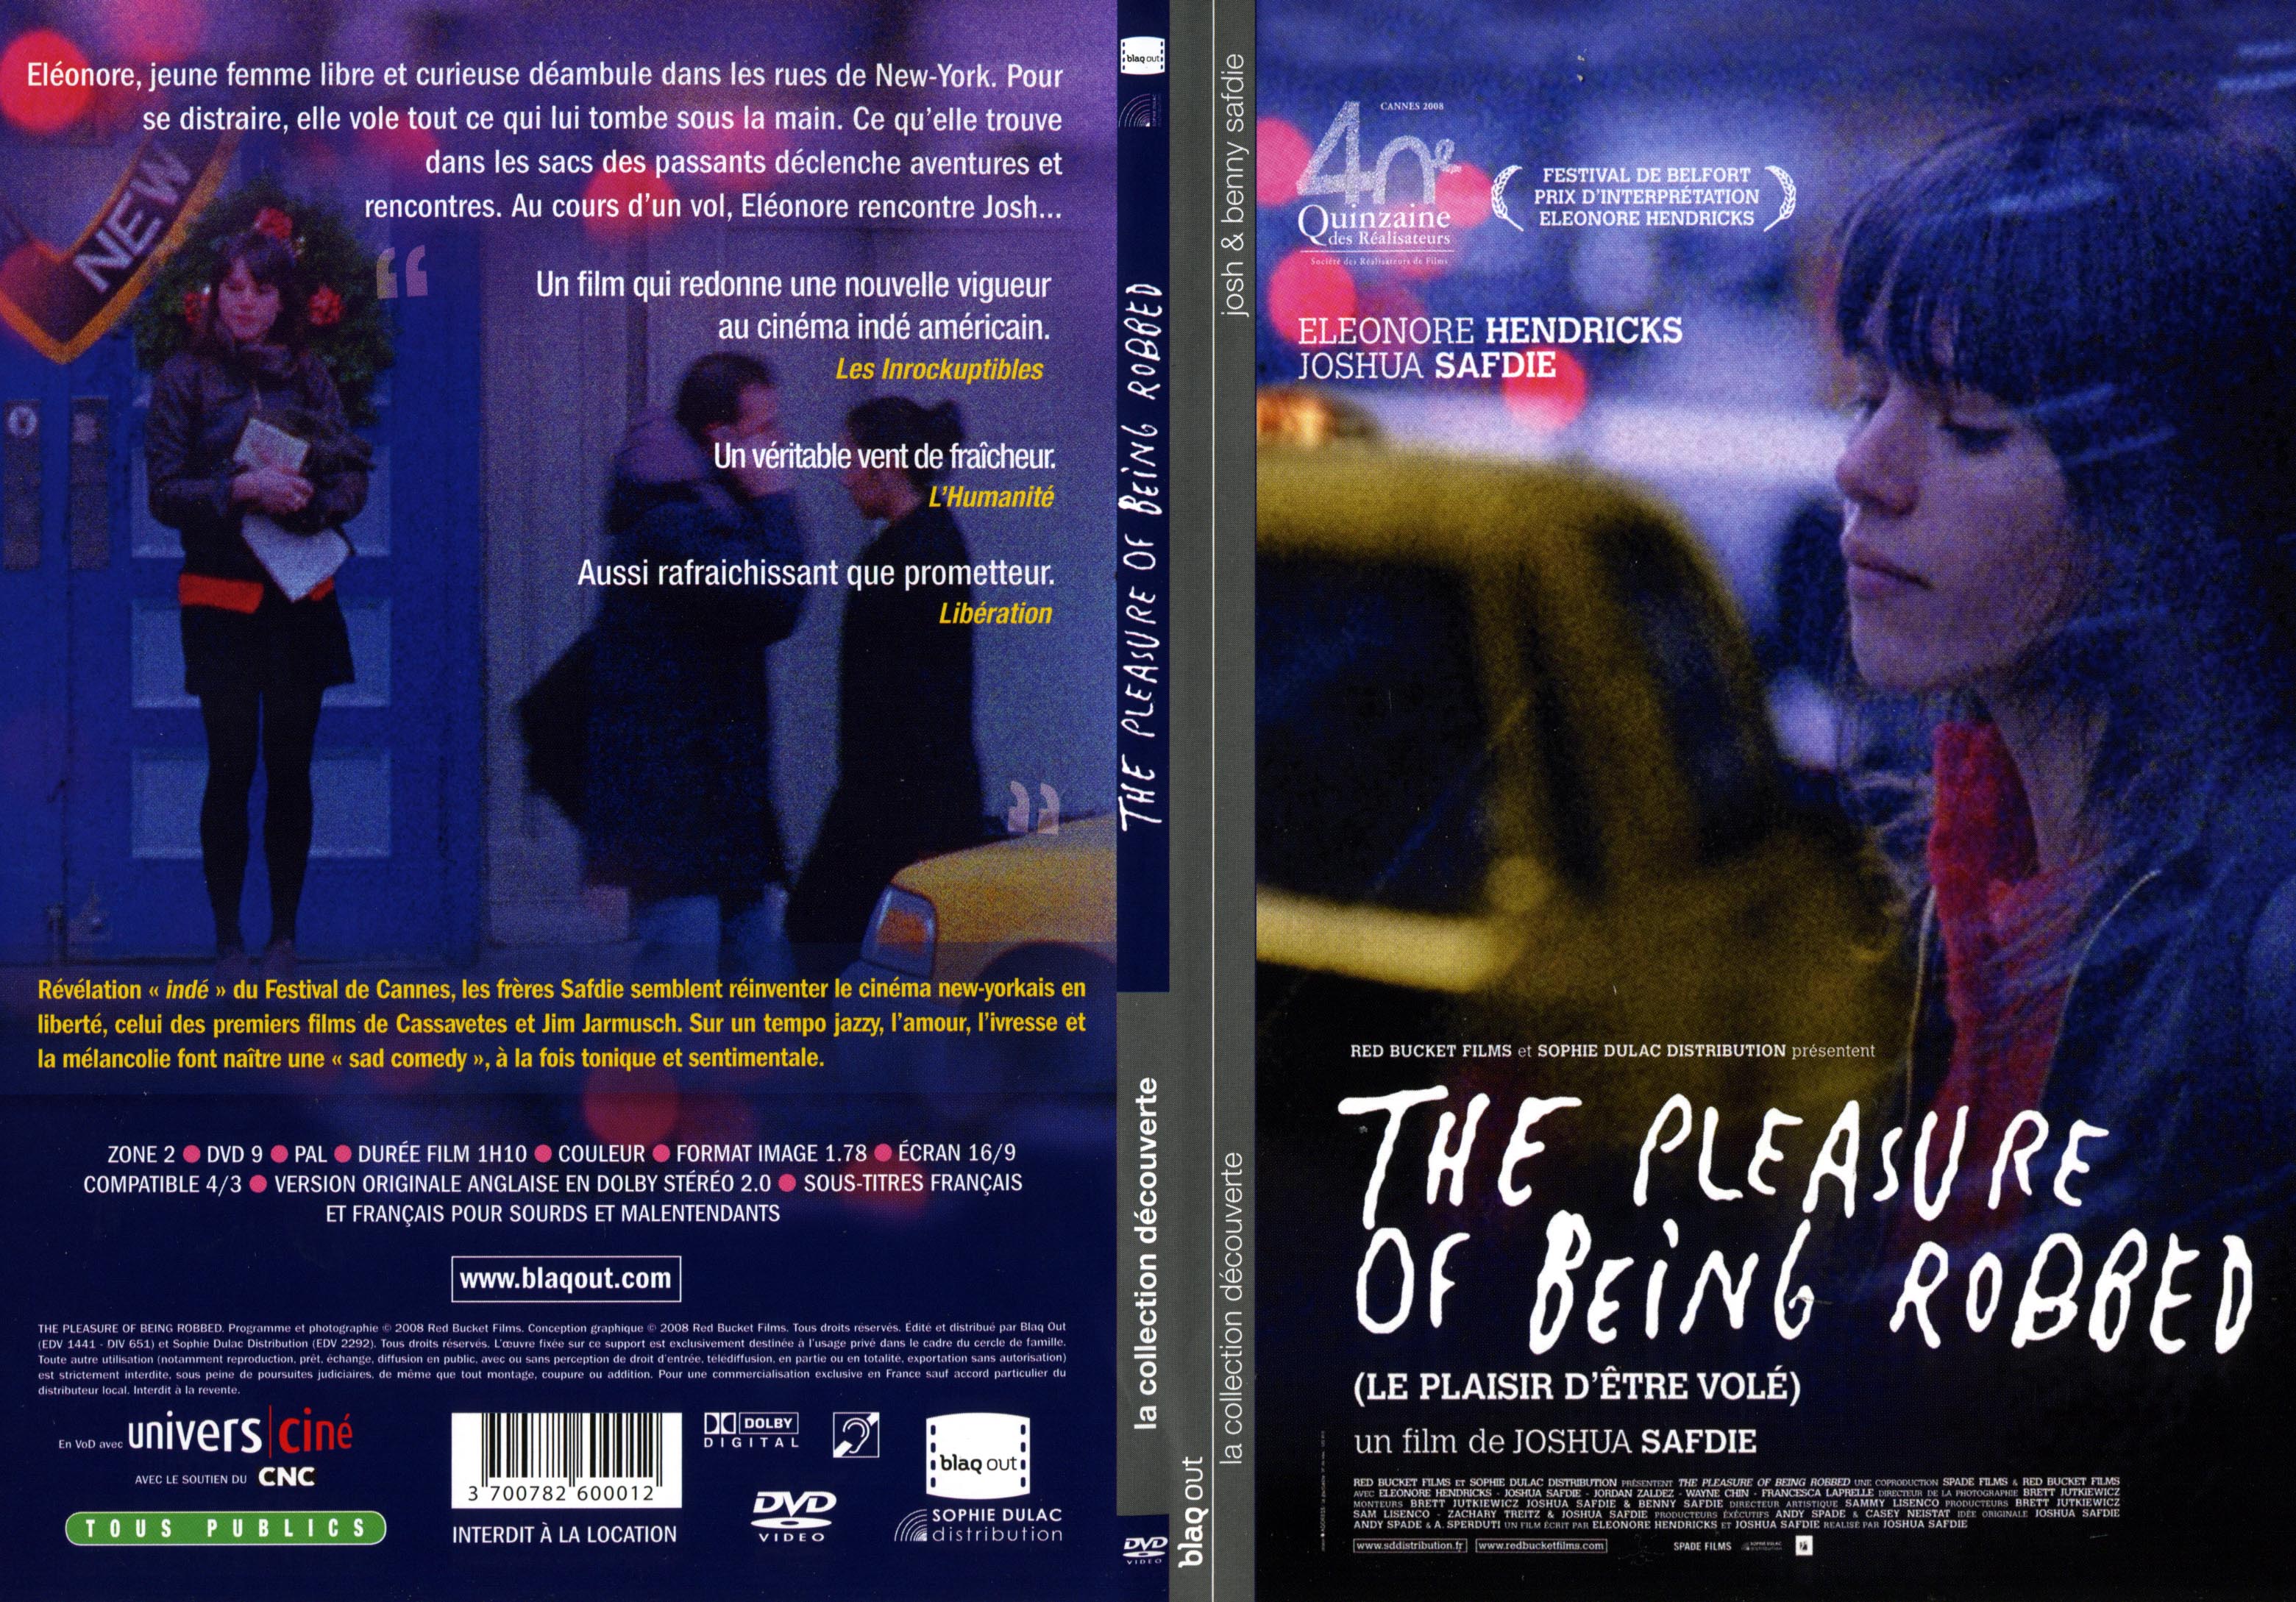 Jaquette DVD The Pleasure of Being Robbed